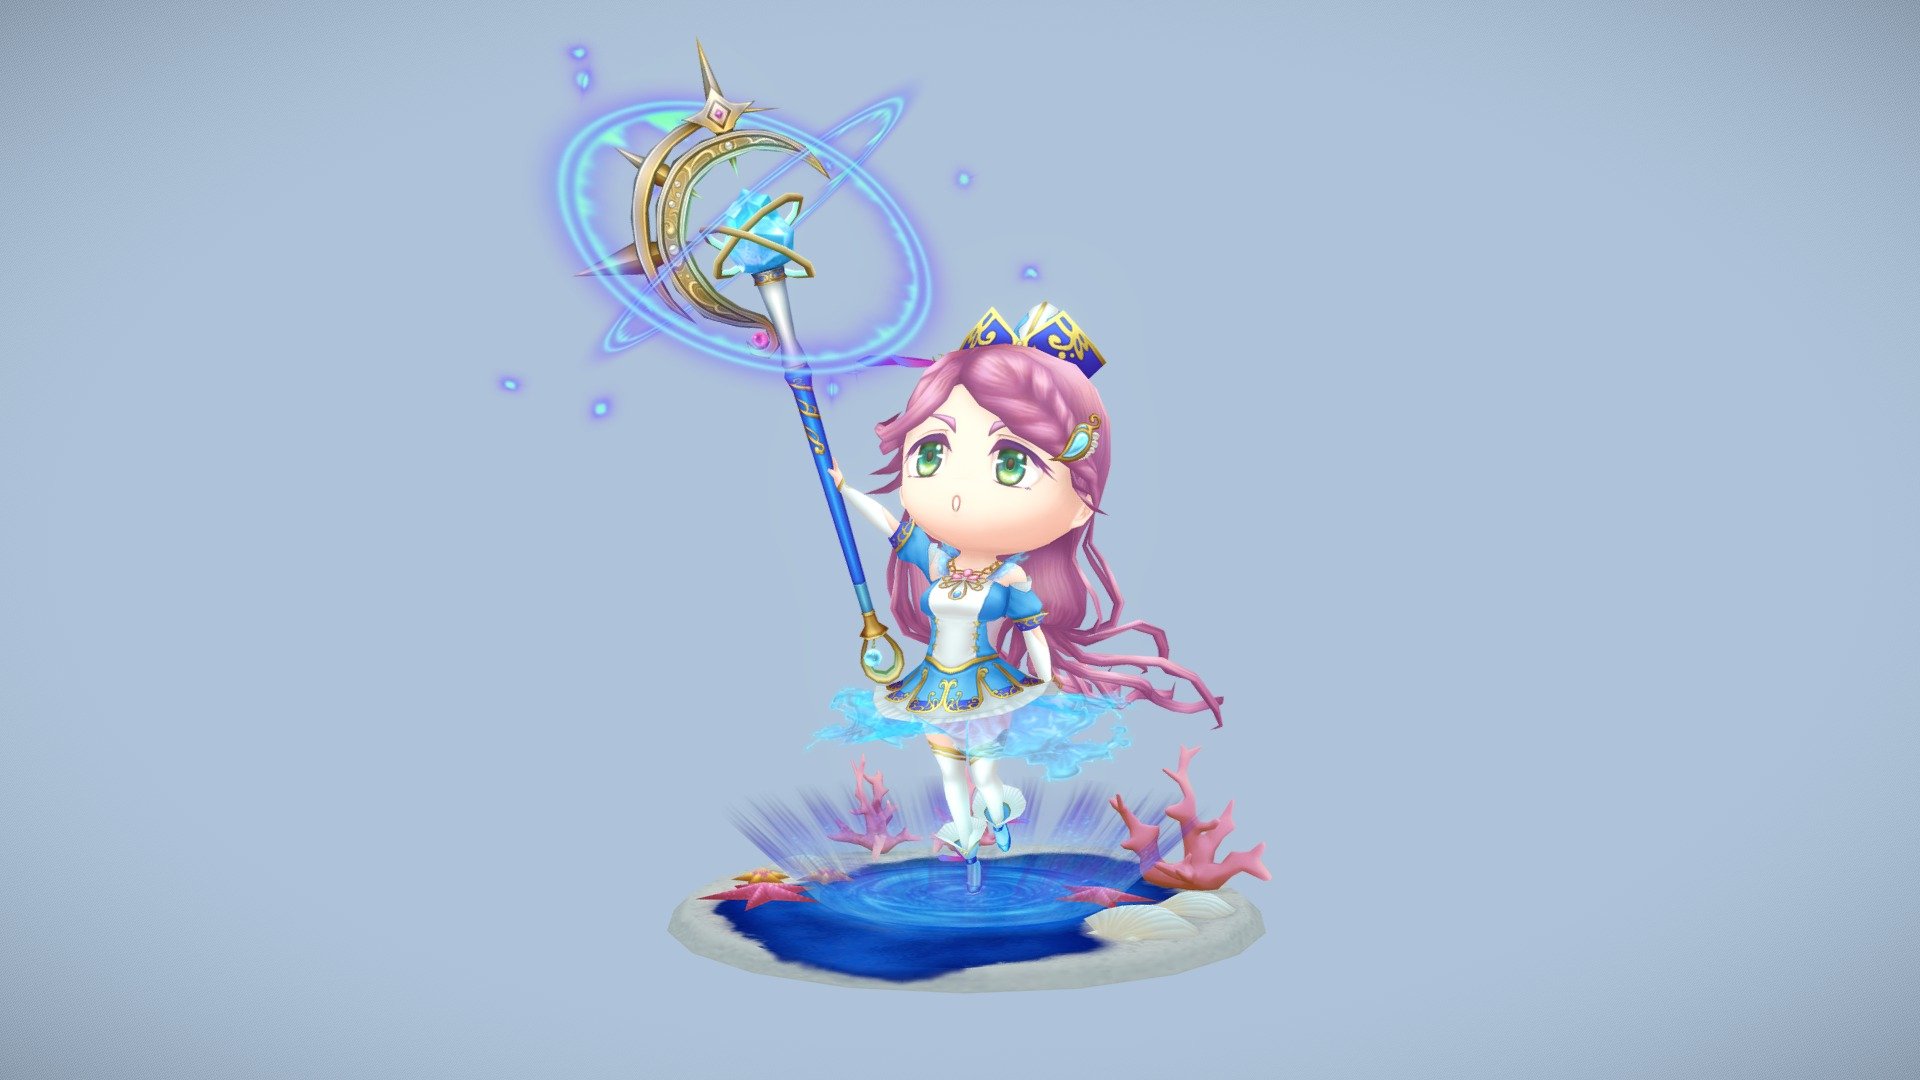 This is my personal project, Chibi character with hand-painted textures which uses Water as a motif.
She's originally rigged and posed in Maya.

「水」をモチーフに個人的に制作した、手描きテクスチャの2.5頭身キャラです。
ポージング用のセットアップはMayaで行っています。 - Chibi healer - 3D model by CSGraphicArt (@rucchi) 3d model